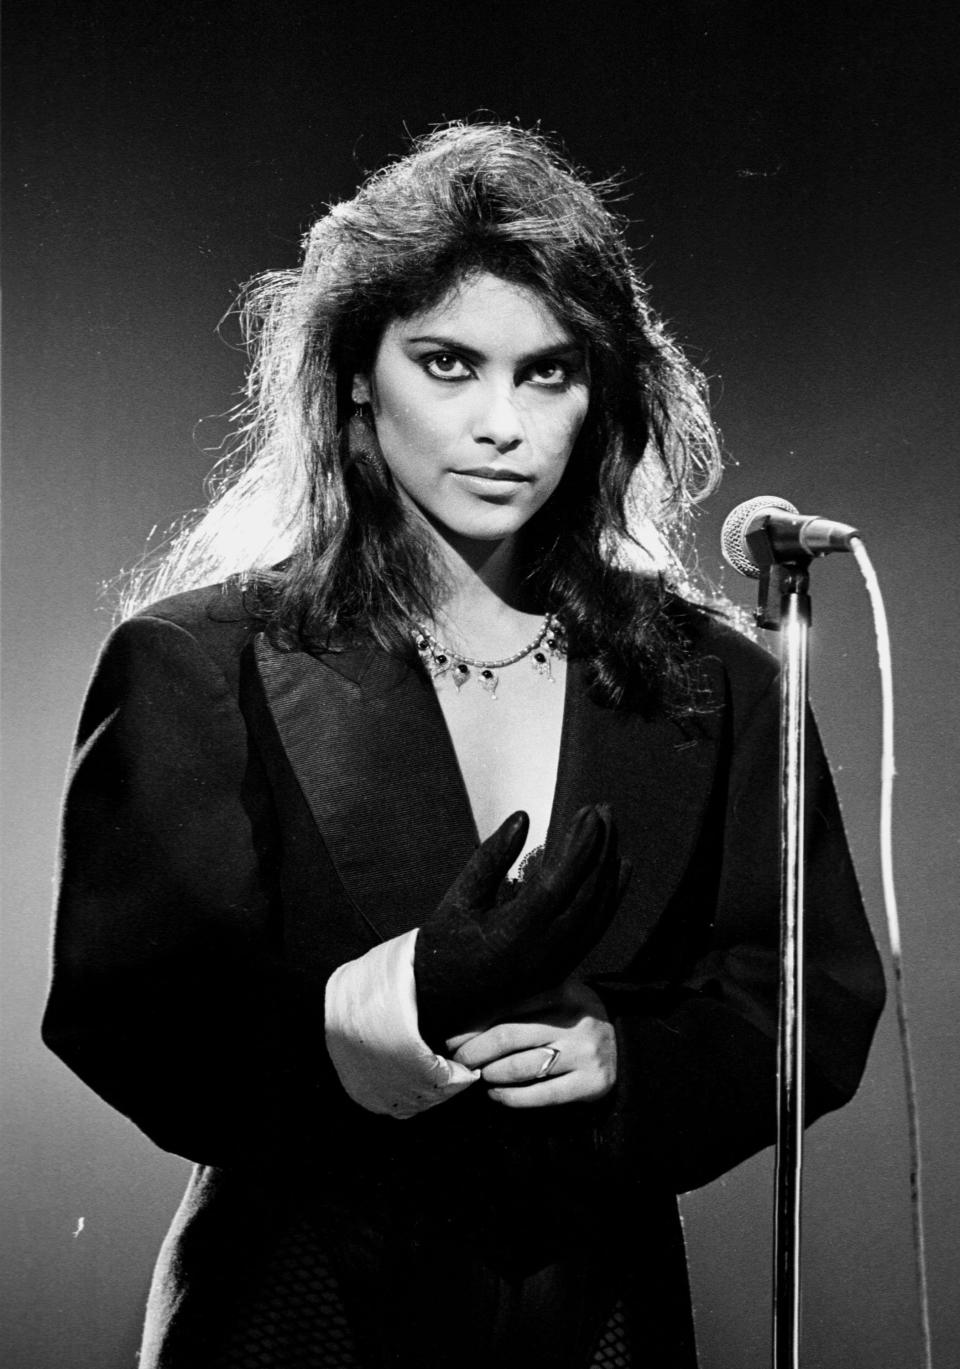 The 1980s pop star and model Denise Matthews, known by the stage name Vanity, died on Feb. 15, 2016 at the age of 57.